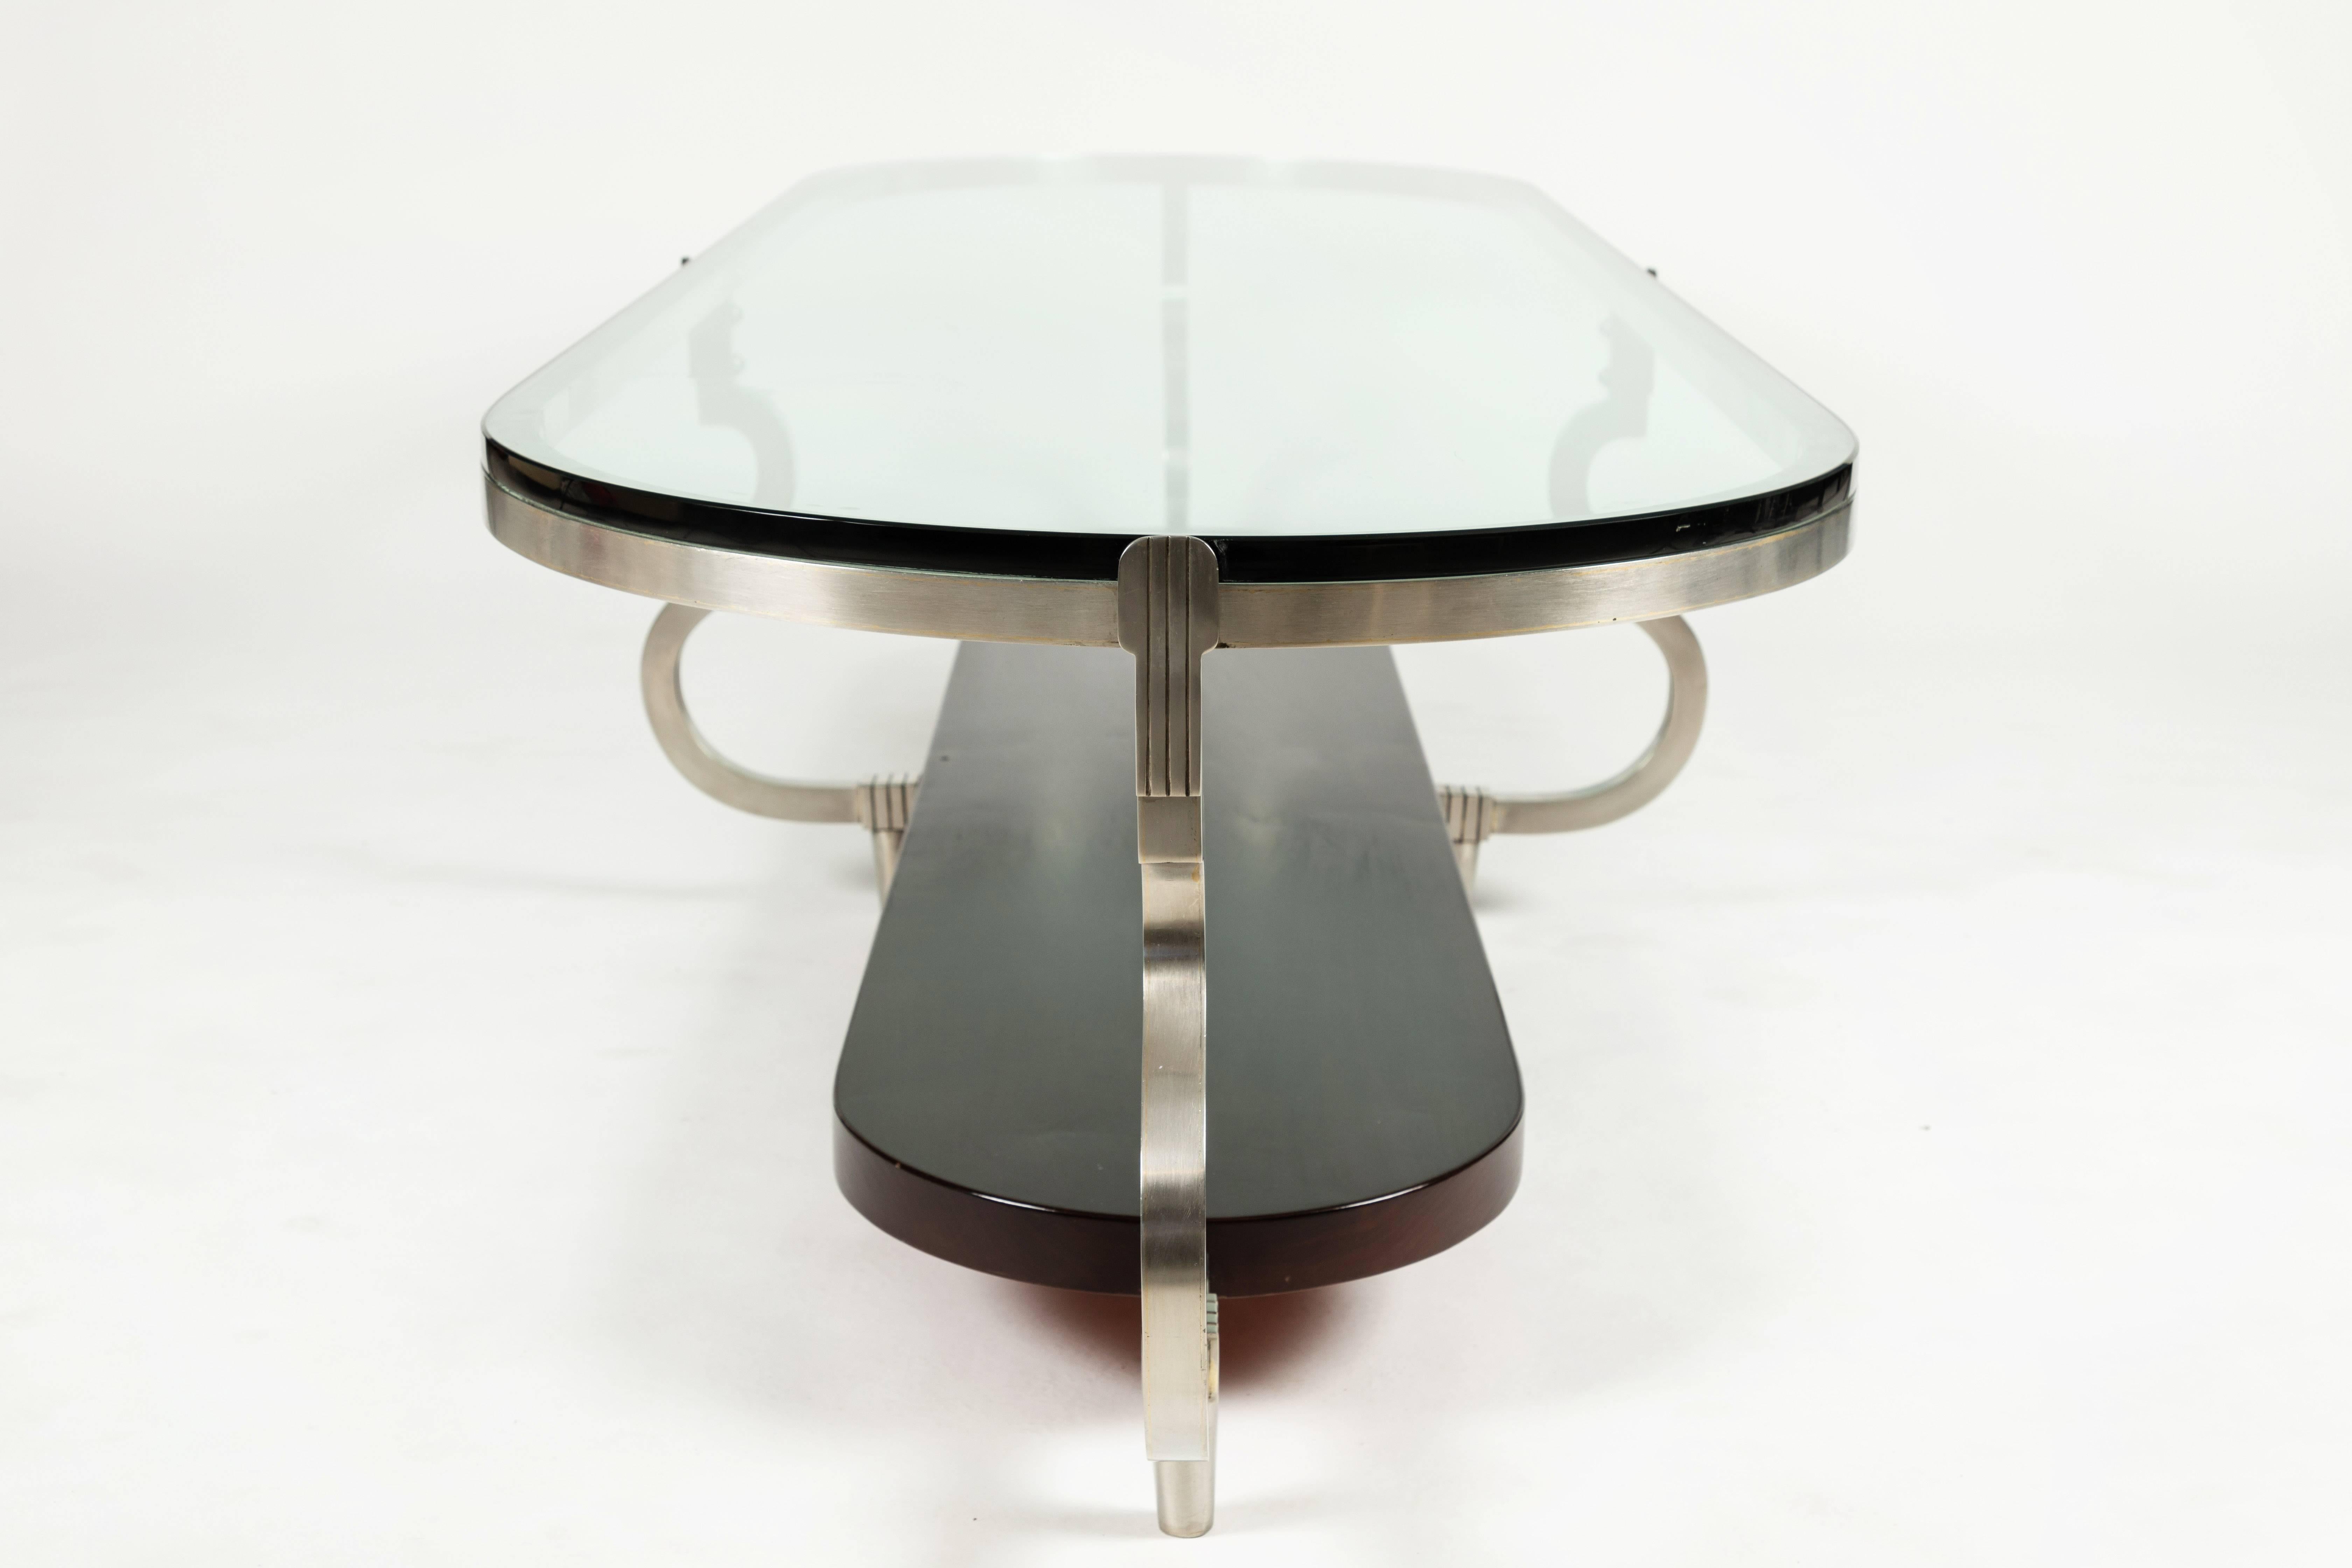 Steel Two-Tiered Custom Cocktail Table by Tommi Parzinger for Parzinger Originals